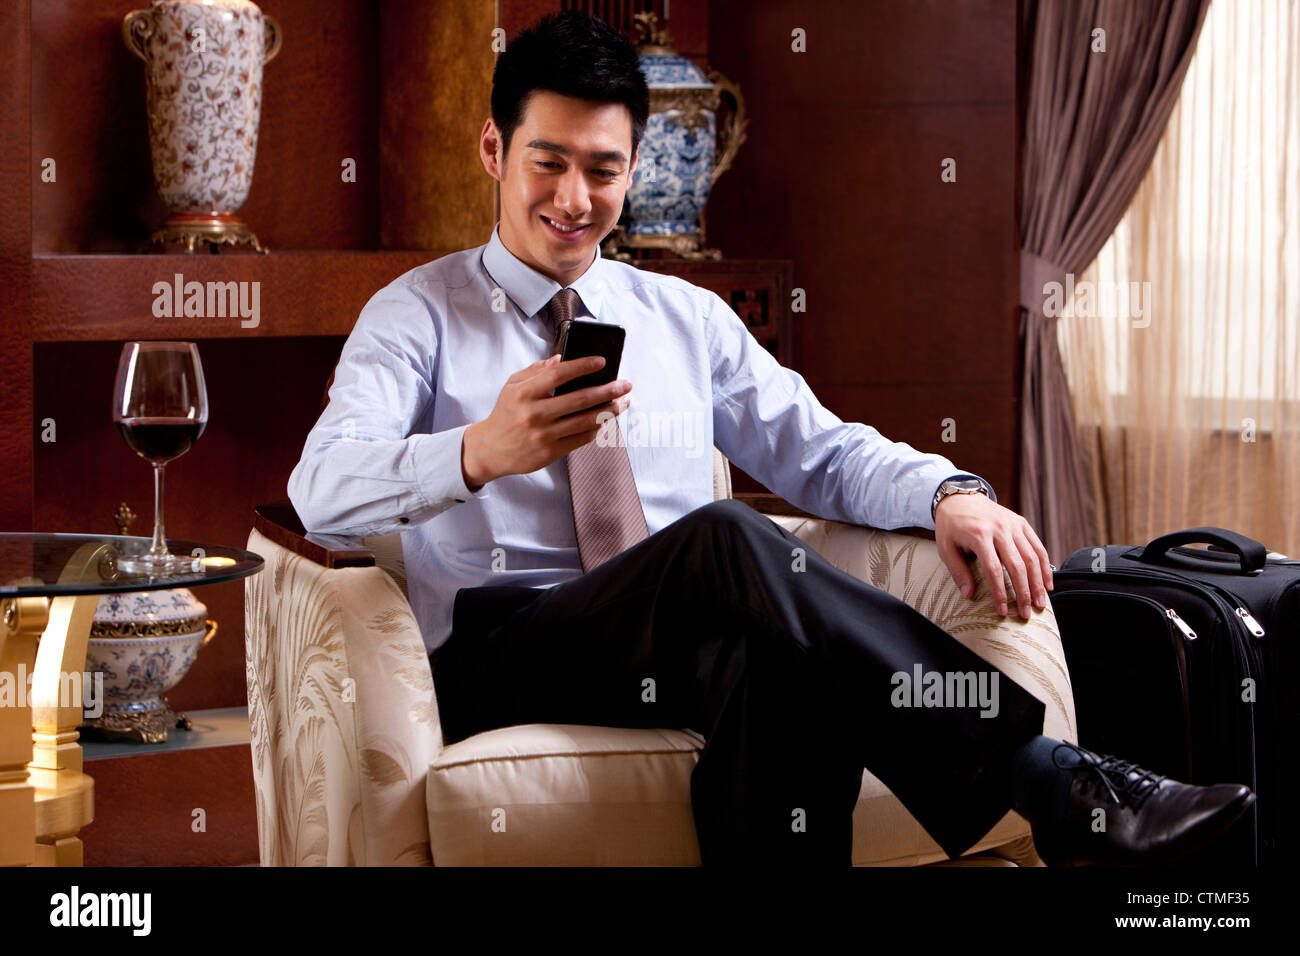 Young businessman using mobile phone in hotel Banque D'Images